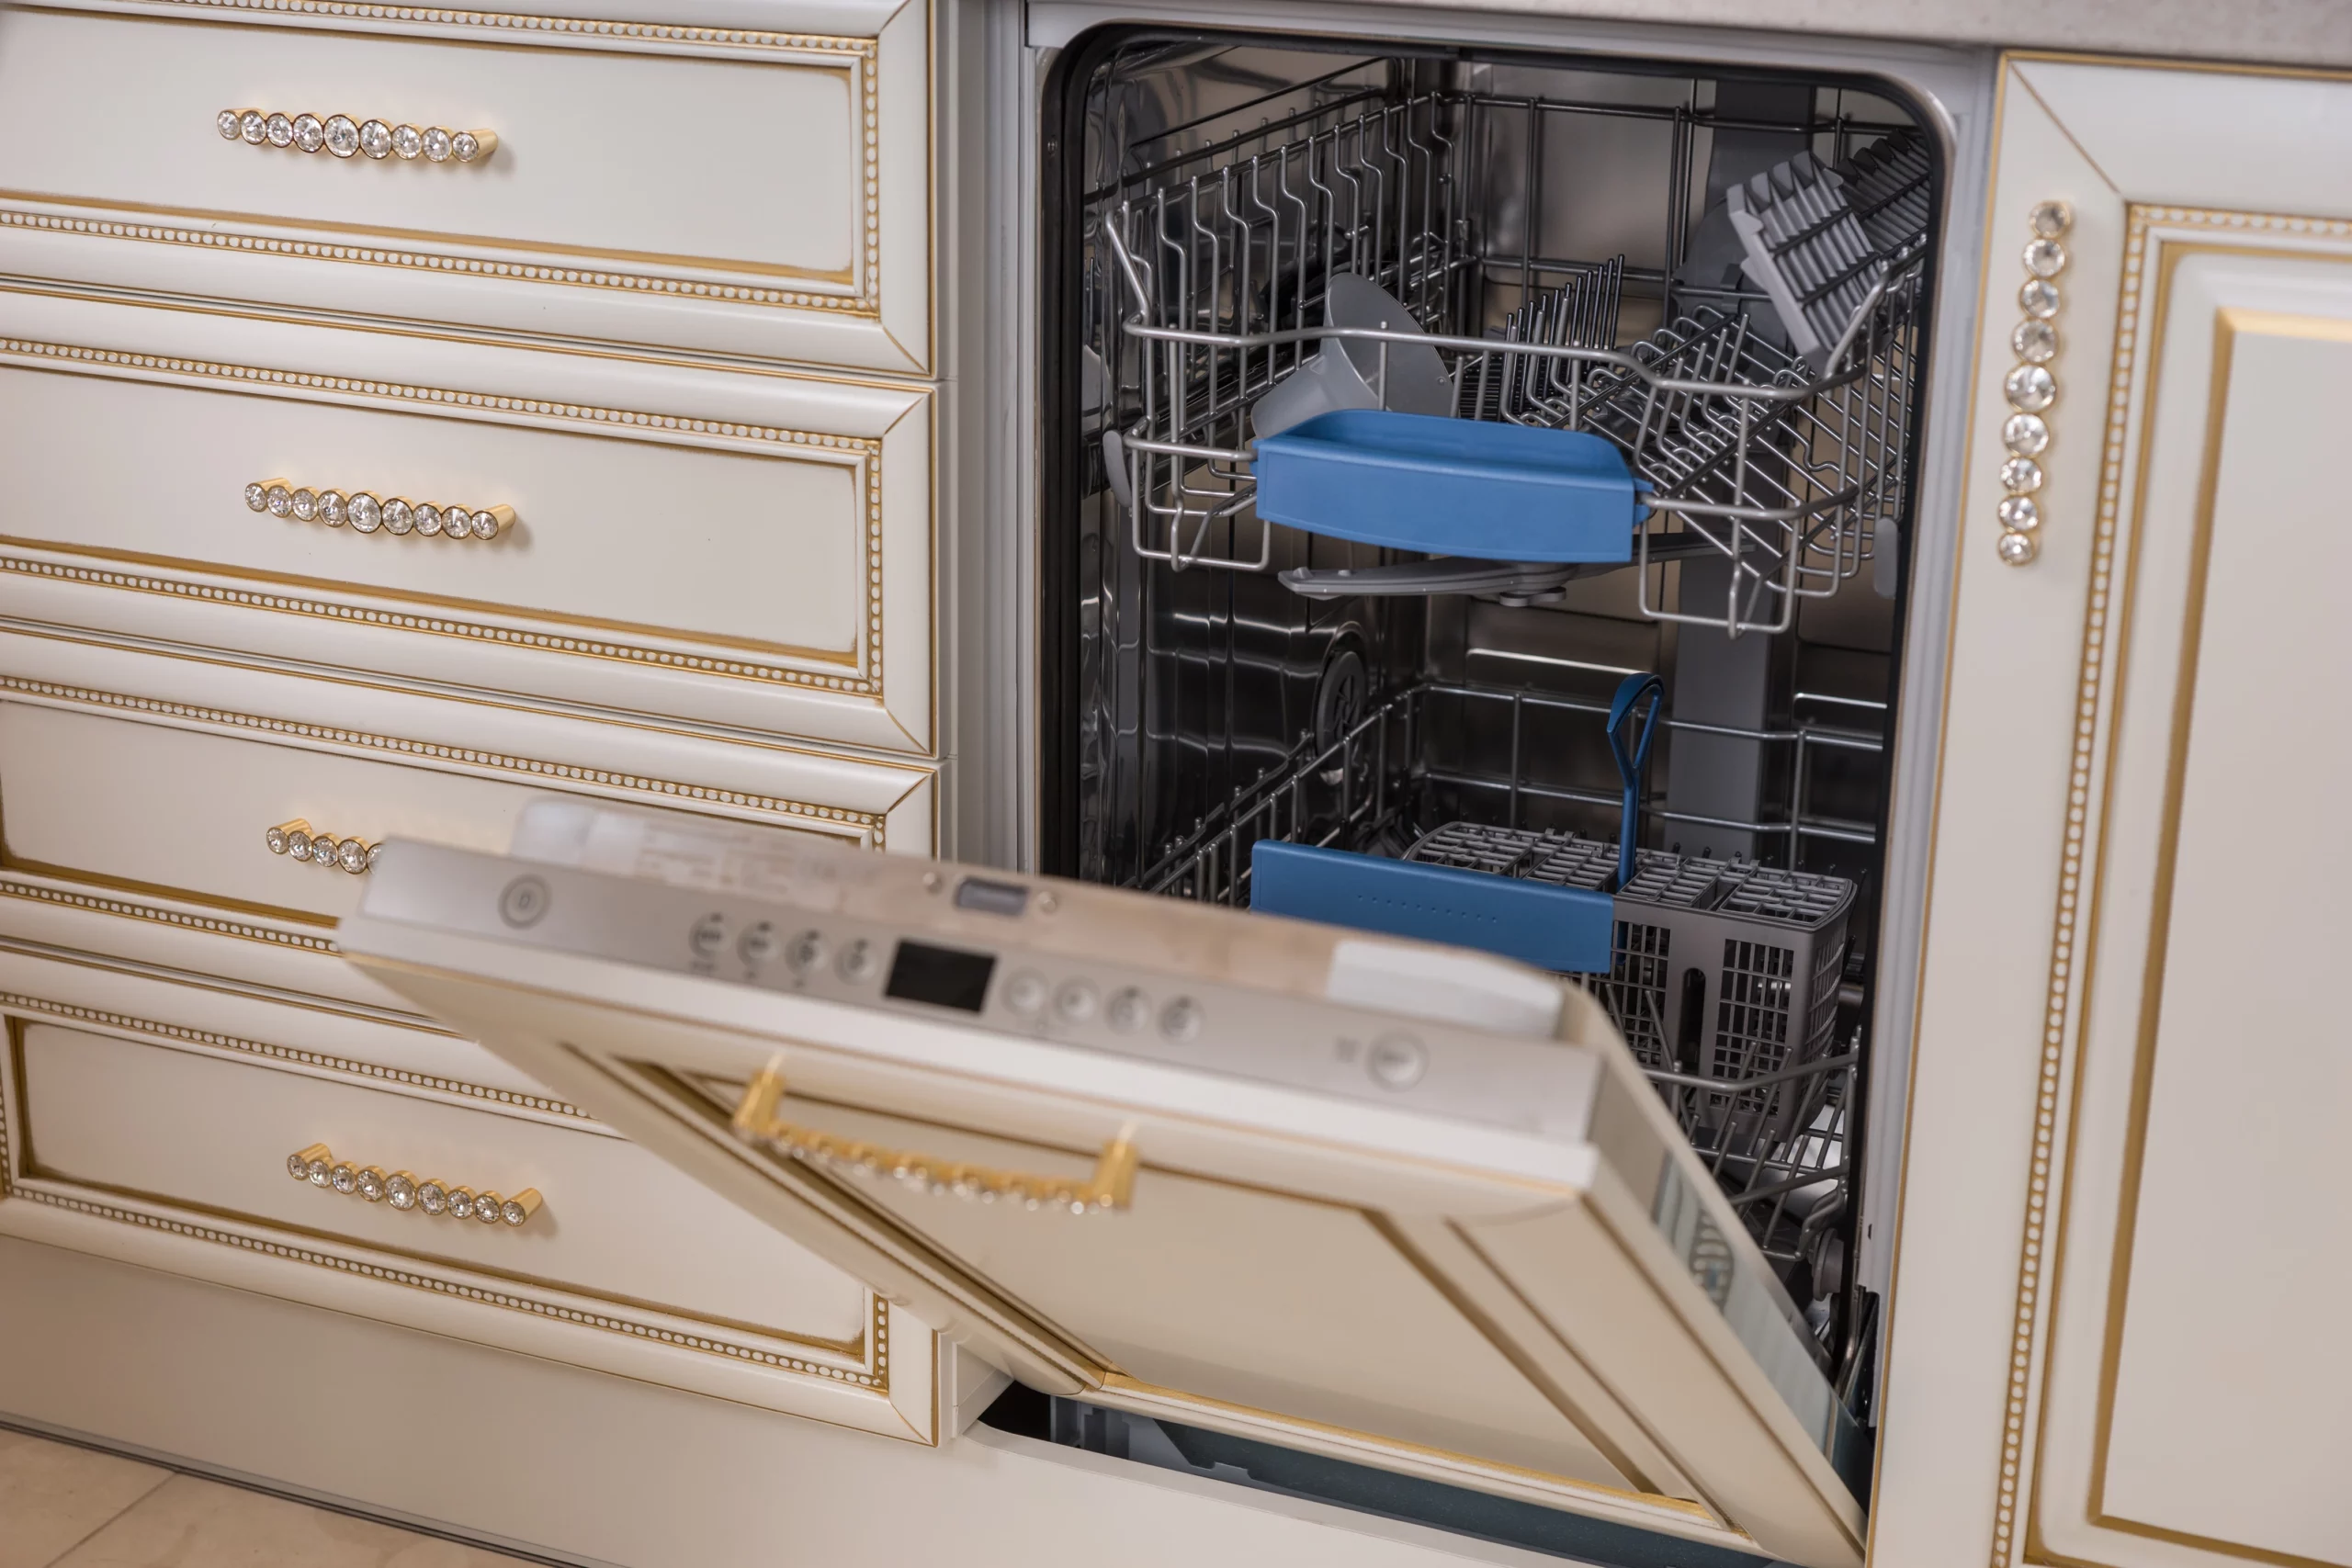 What to Do with an Old Dishwasher: Recycling and Disposal Options